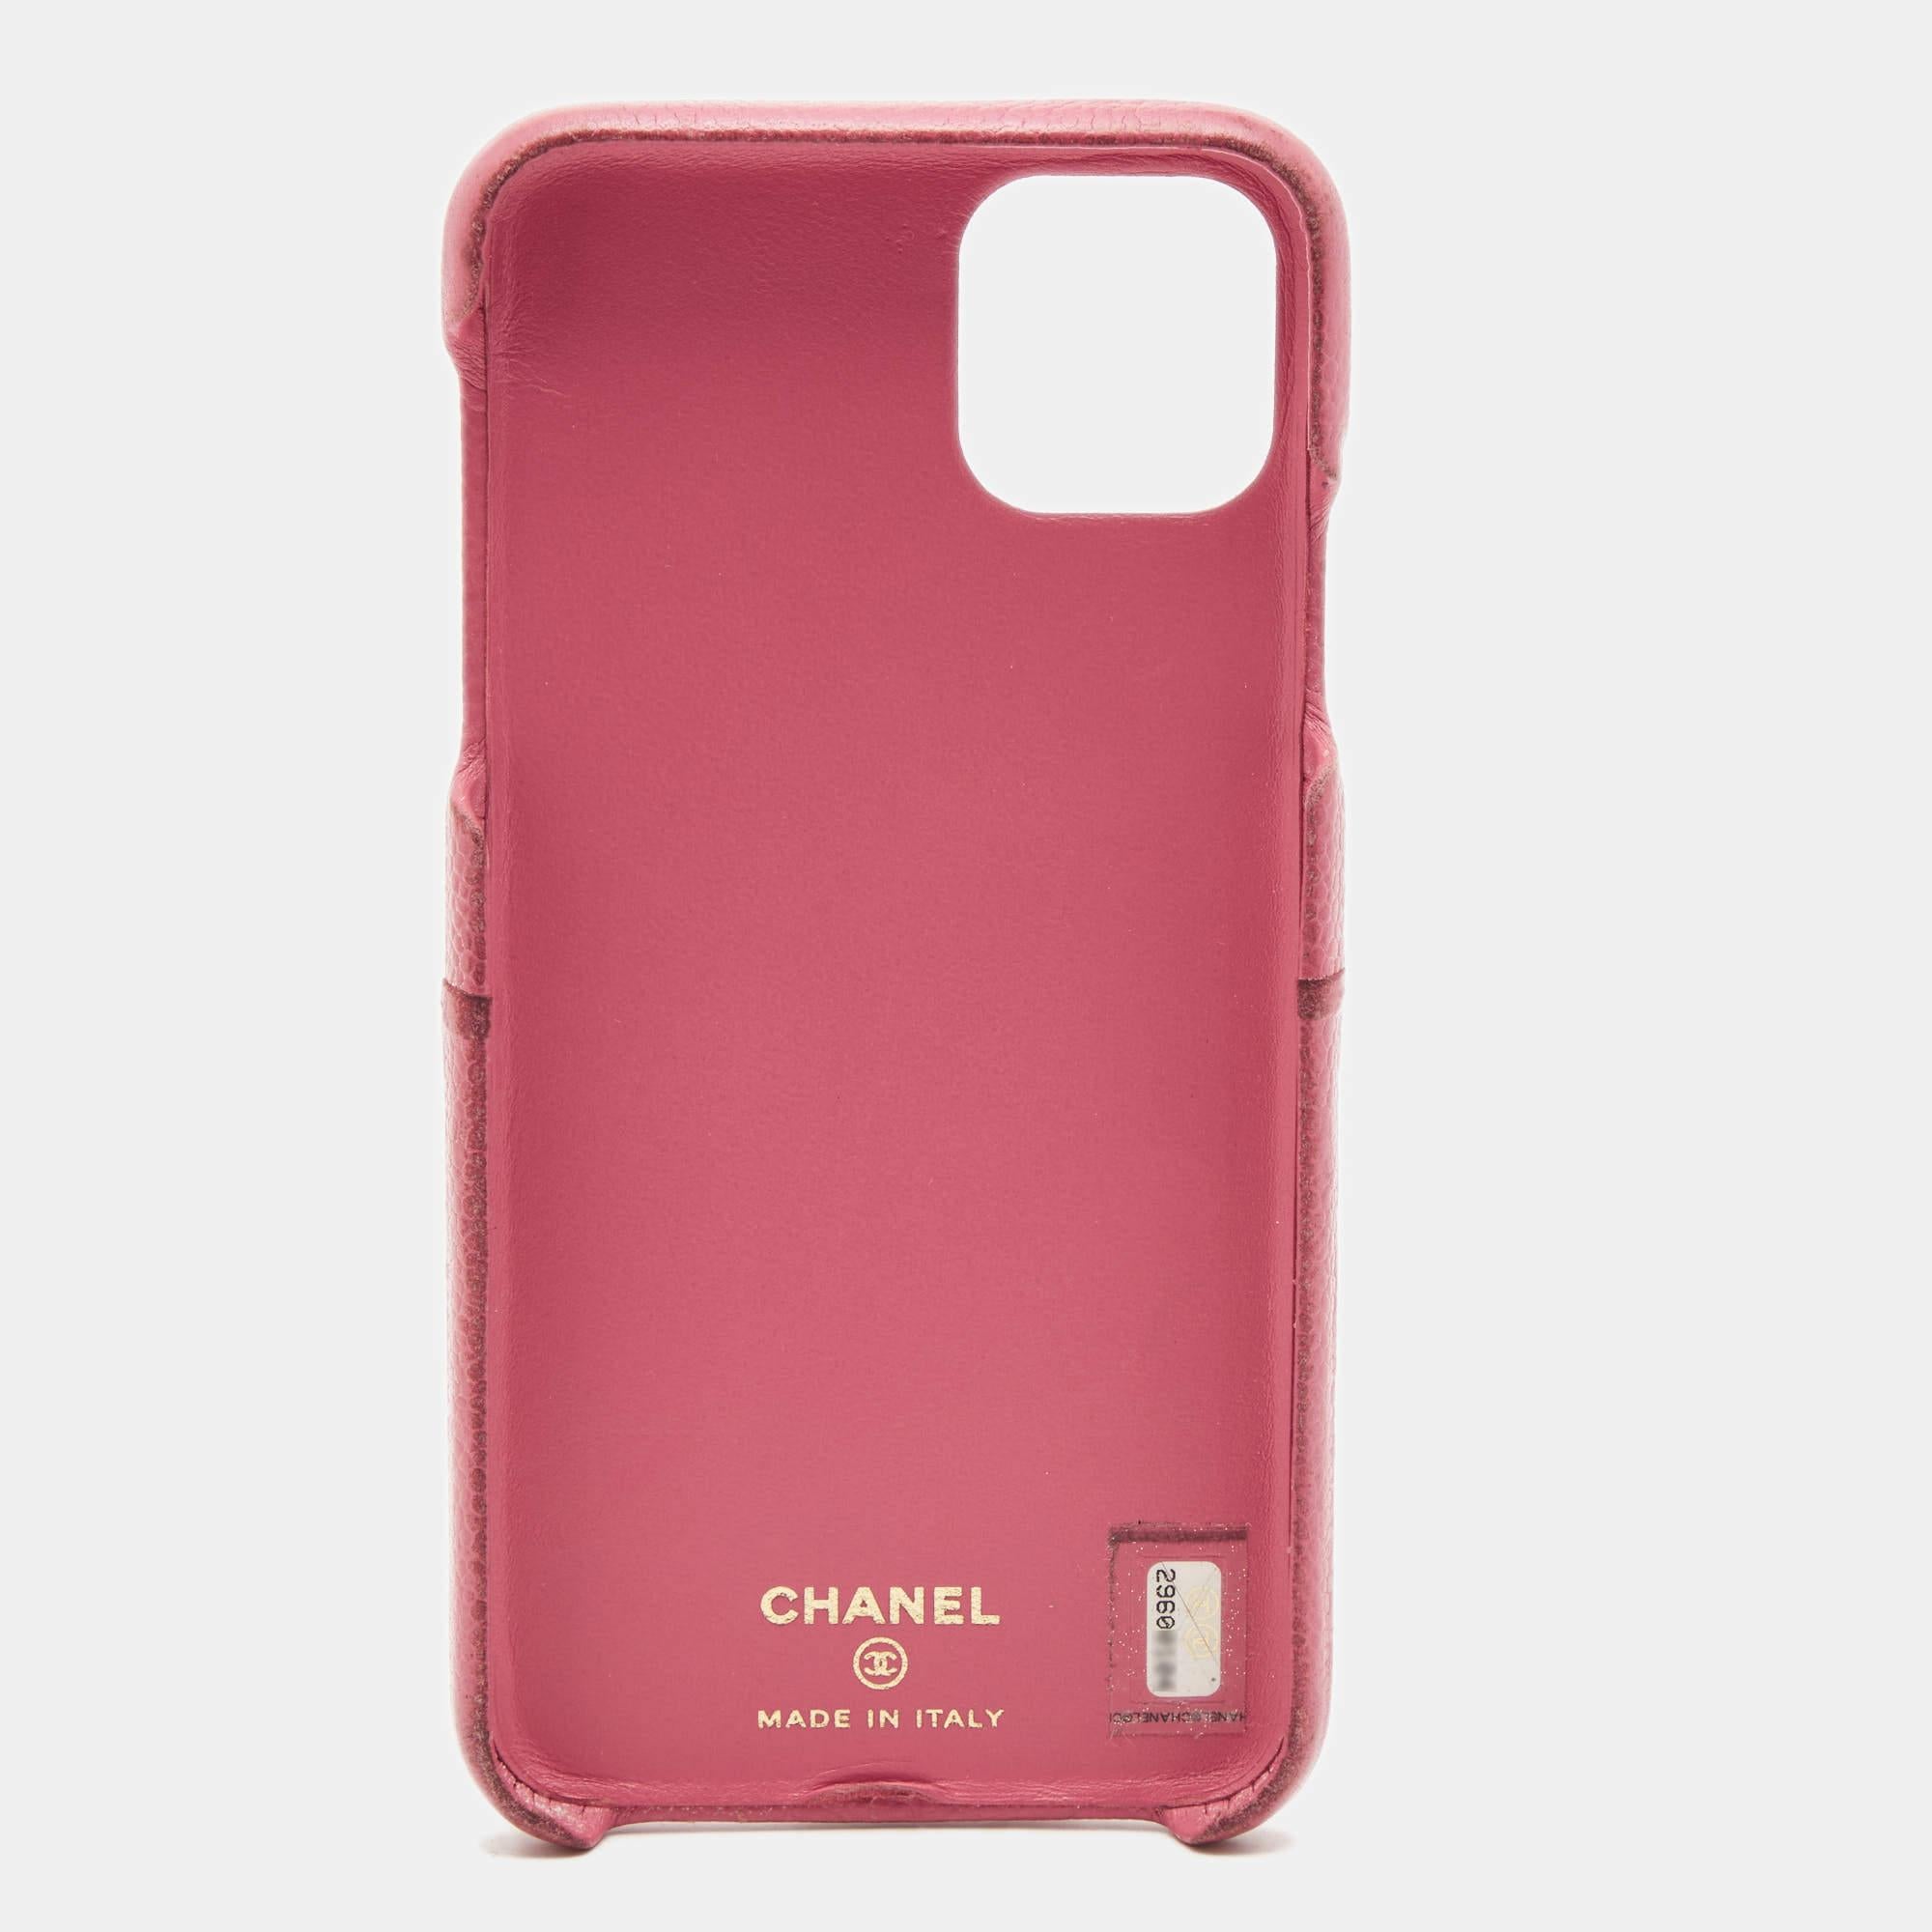 This case from Chanel is for iPhone 11 Pro Max users. It is made from Caviar leather and features the signature diamond quilting, a slip pocket, and the CC logo. The case has been designed to protect your phone while complementing your style at the